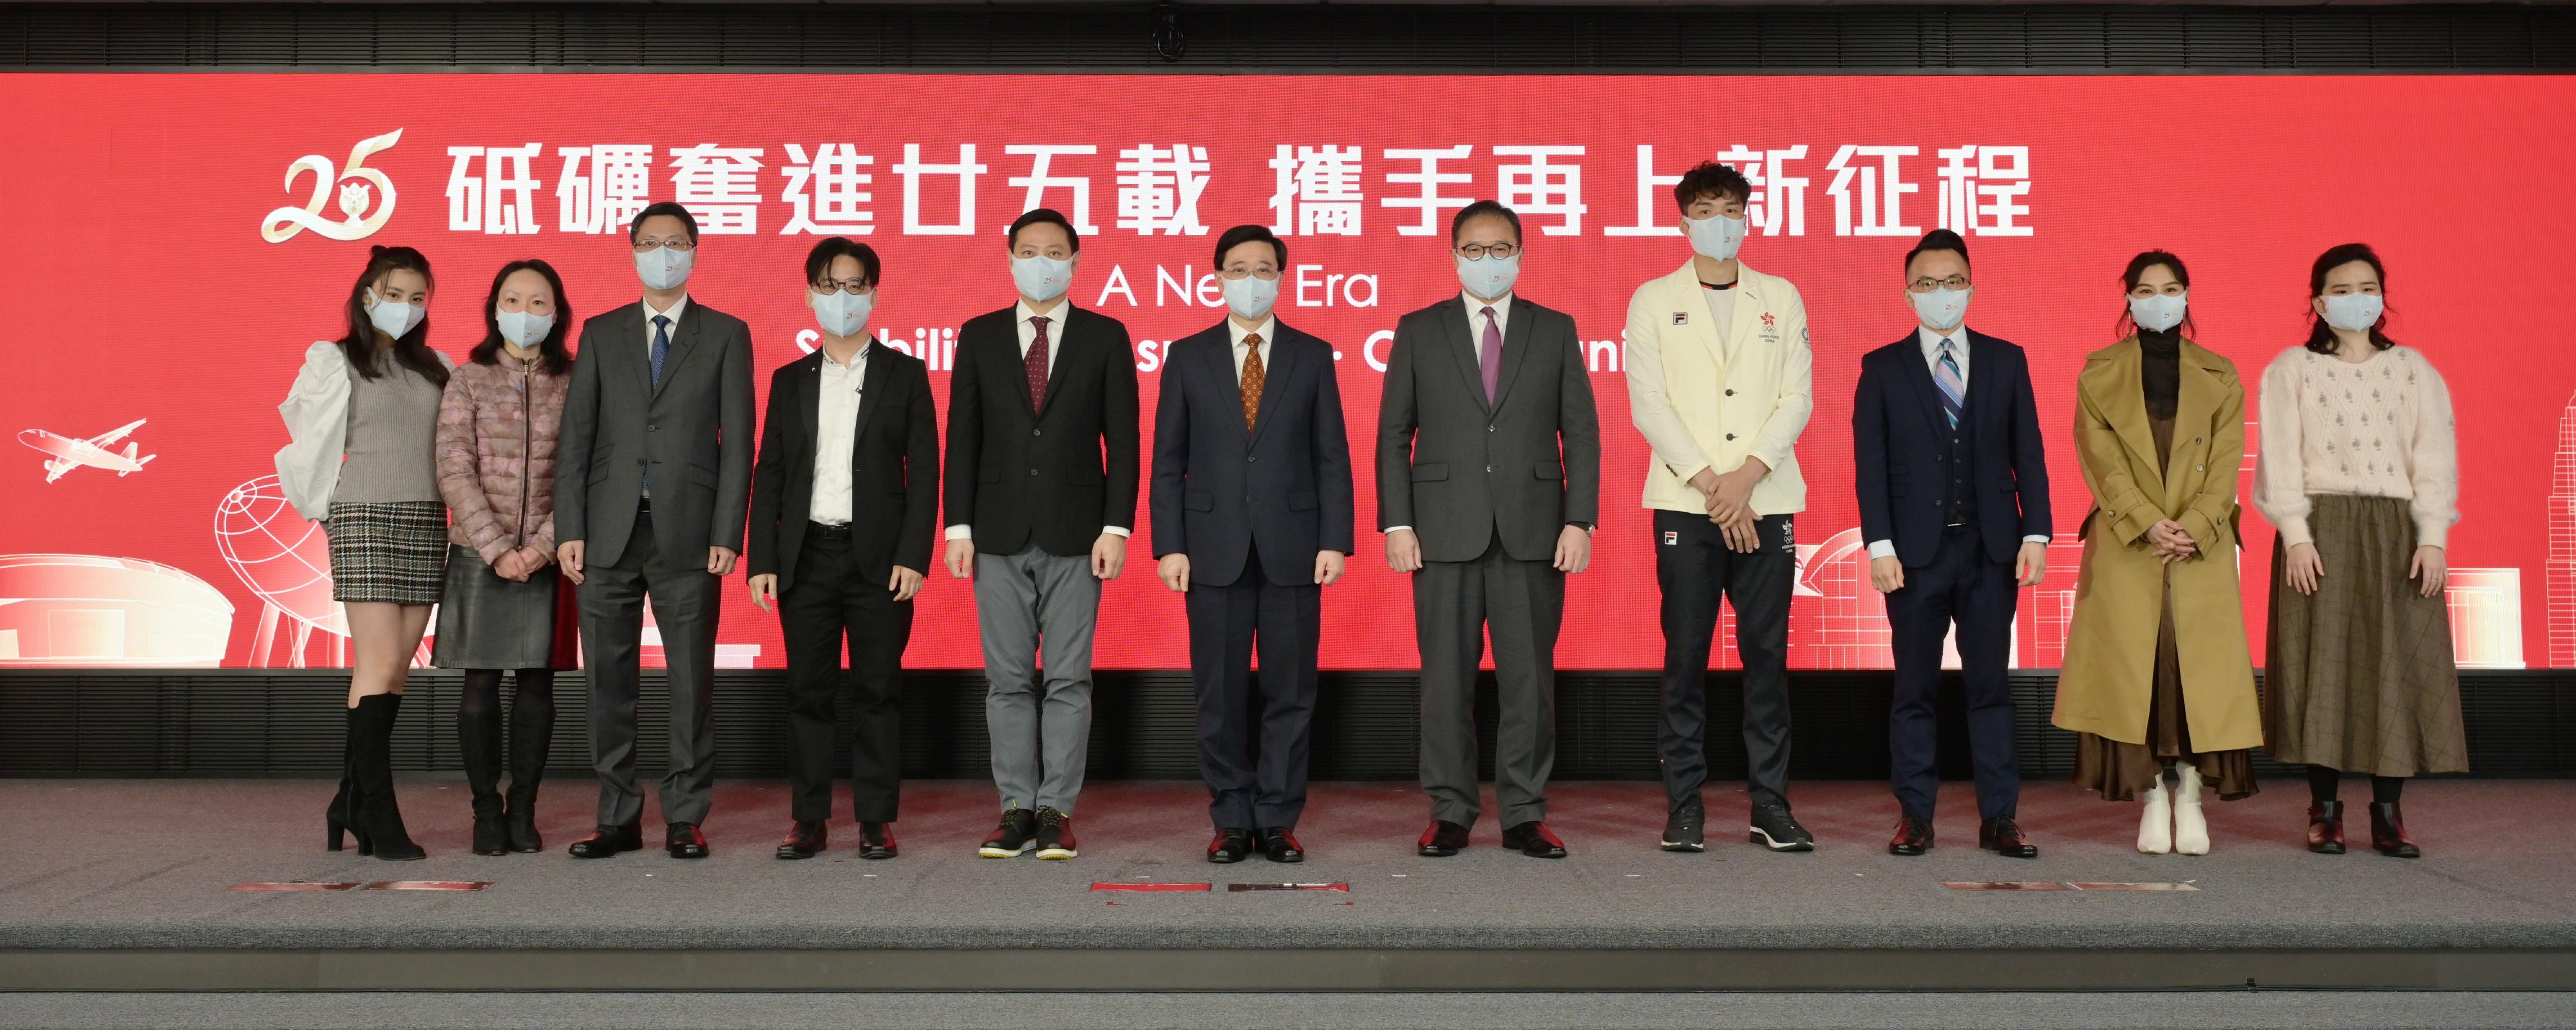 The Launch of Celebrations for the 25th Anniversary of the Establishment of the Hong Kong Special Administrative Region of the People’s Republic of China was held today (December 29). The Chief Secretary for Administration, Mr John Lee (centre); the Secretary for Home Affairs, Mr Caspar Tsui (fifth left); the Permanent Secretary for Home Affairs, Mr Joe Wong (fifth right); the Director of the Project Planning Office, Mr Eddie Mak (third left); the Director of Broadcasting, Mr Patrick Li (third right); and the Acting Director of Information Services, Ms Grace Ng (second left); together with composer Alan Cheung (fourth left); singers Gin Lee (second right) and Chantel Yiu (first left); soprano Michelle Siu (first right); and fencer Cheung Siu-lun (fourth right), posed for a group photo at the ceremony.